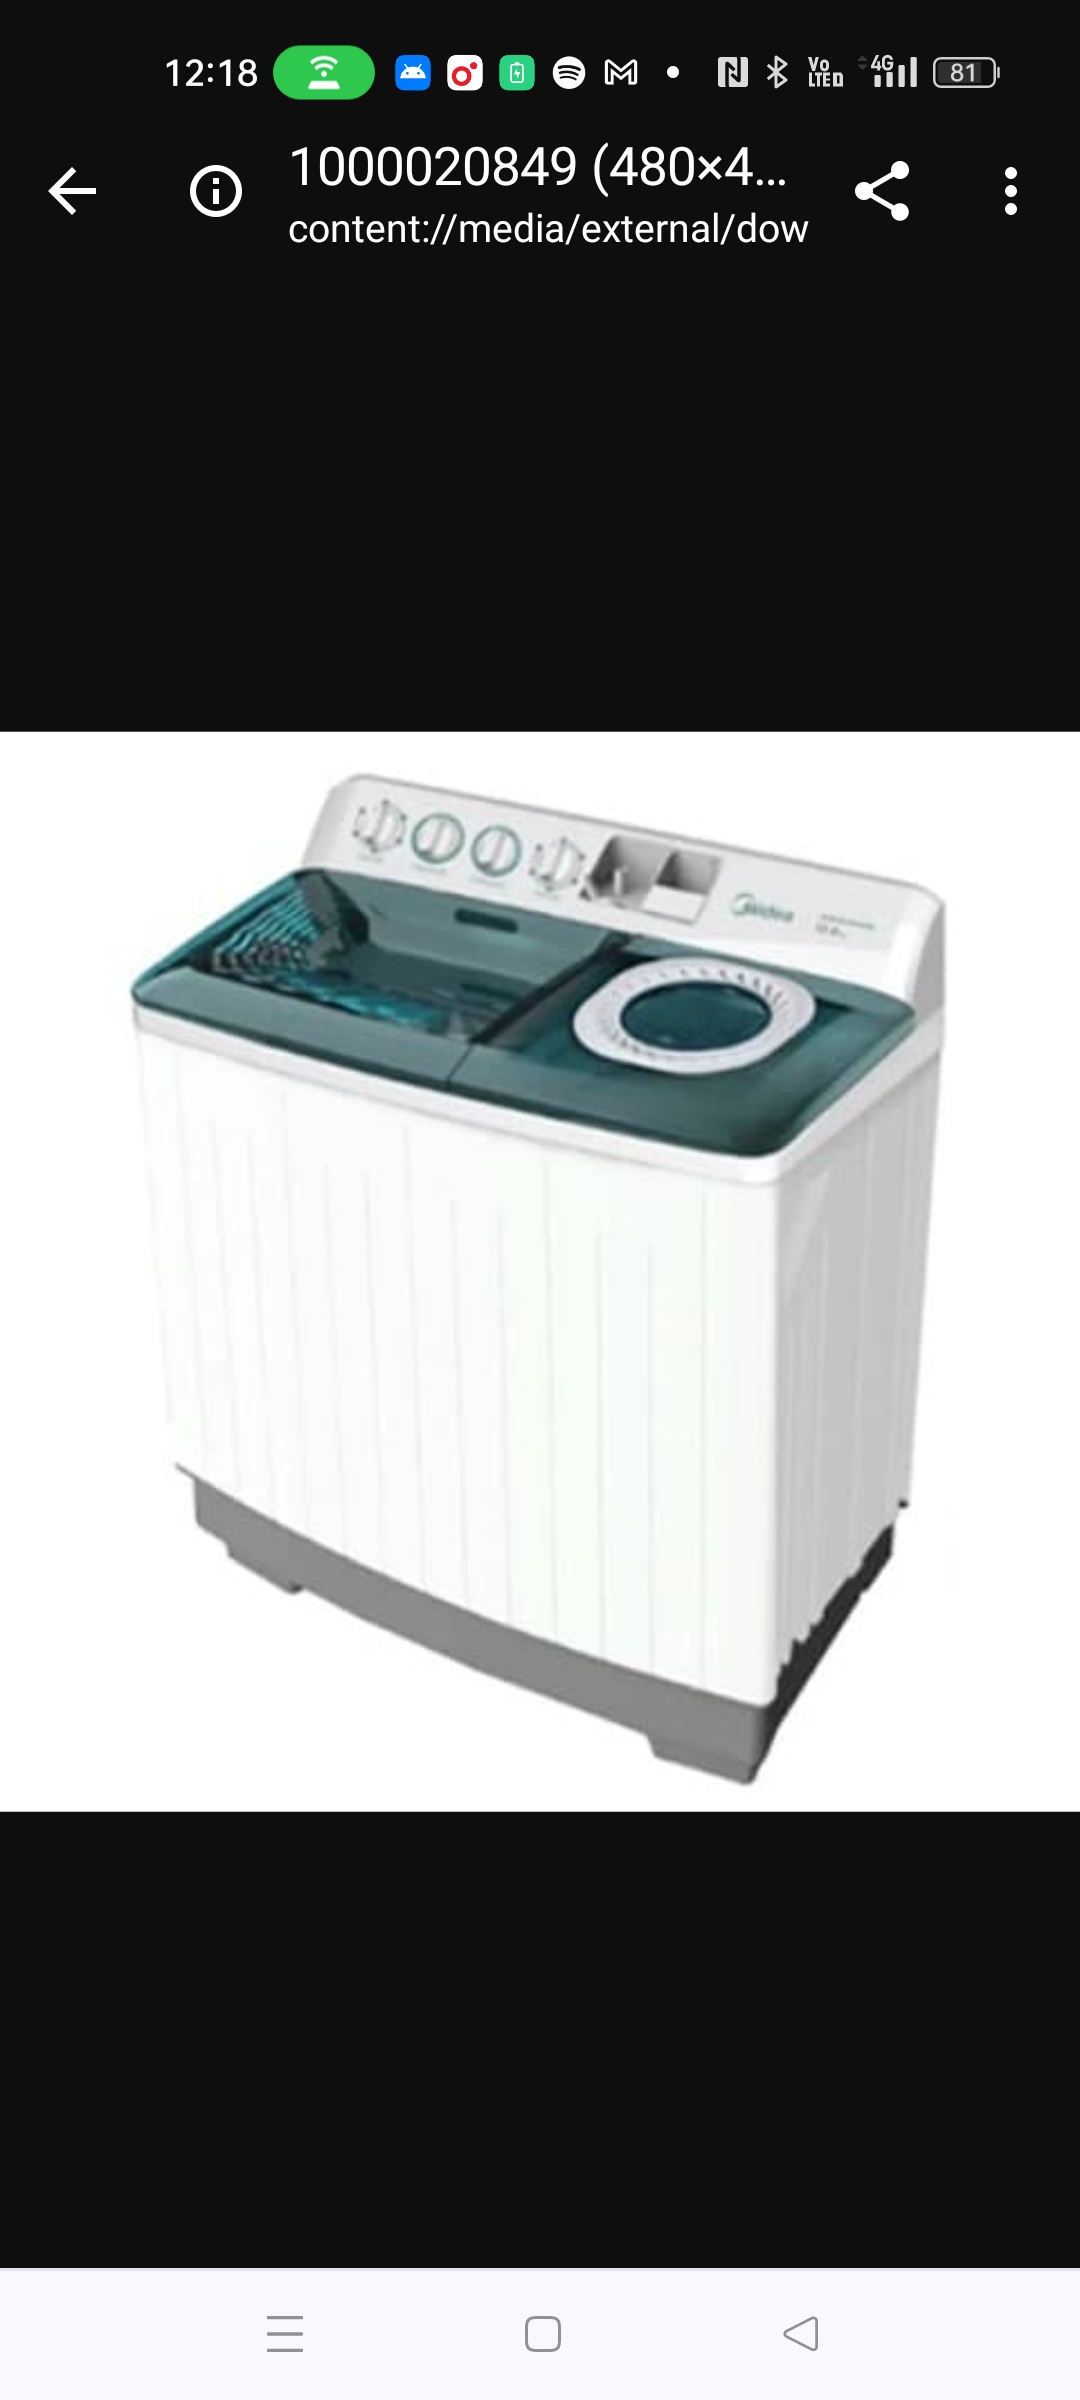 Ikon Electric Oven, Midea Washing Machine, beds with cots